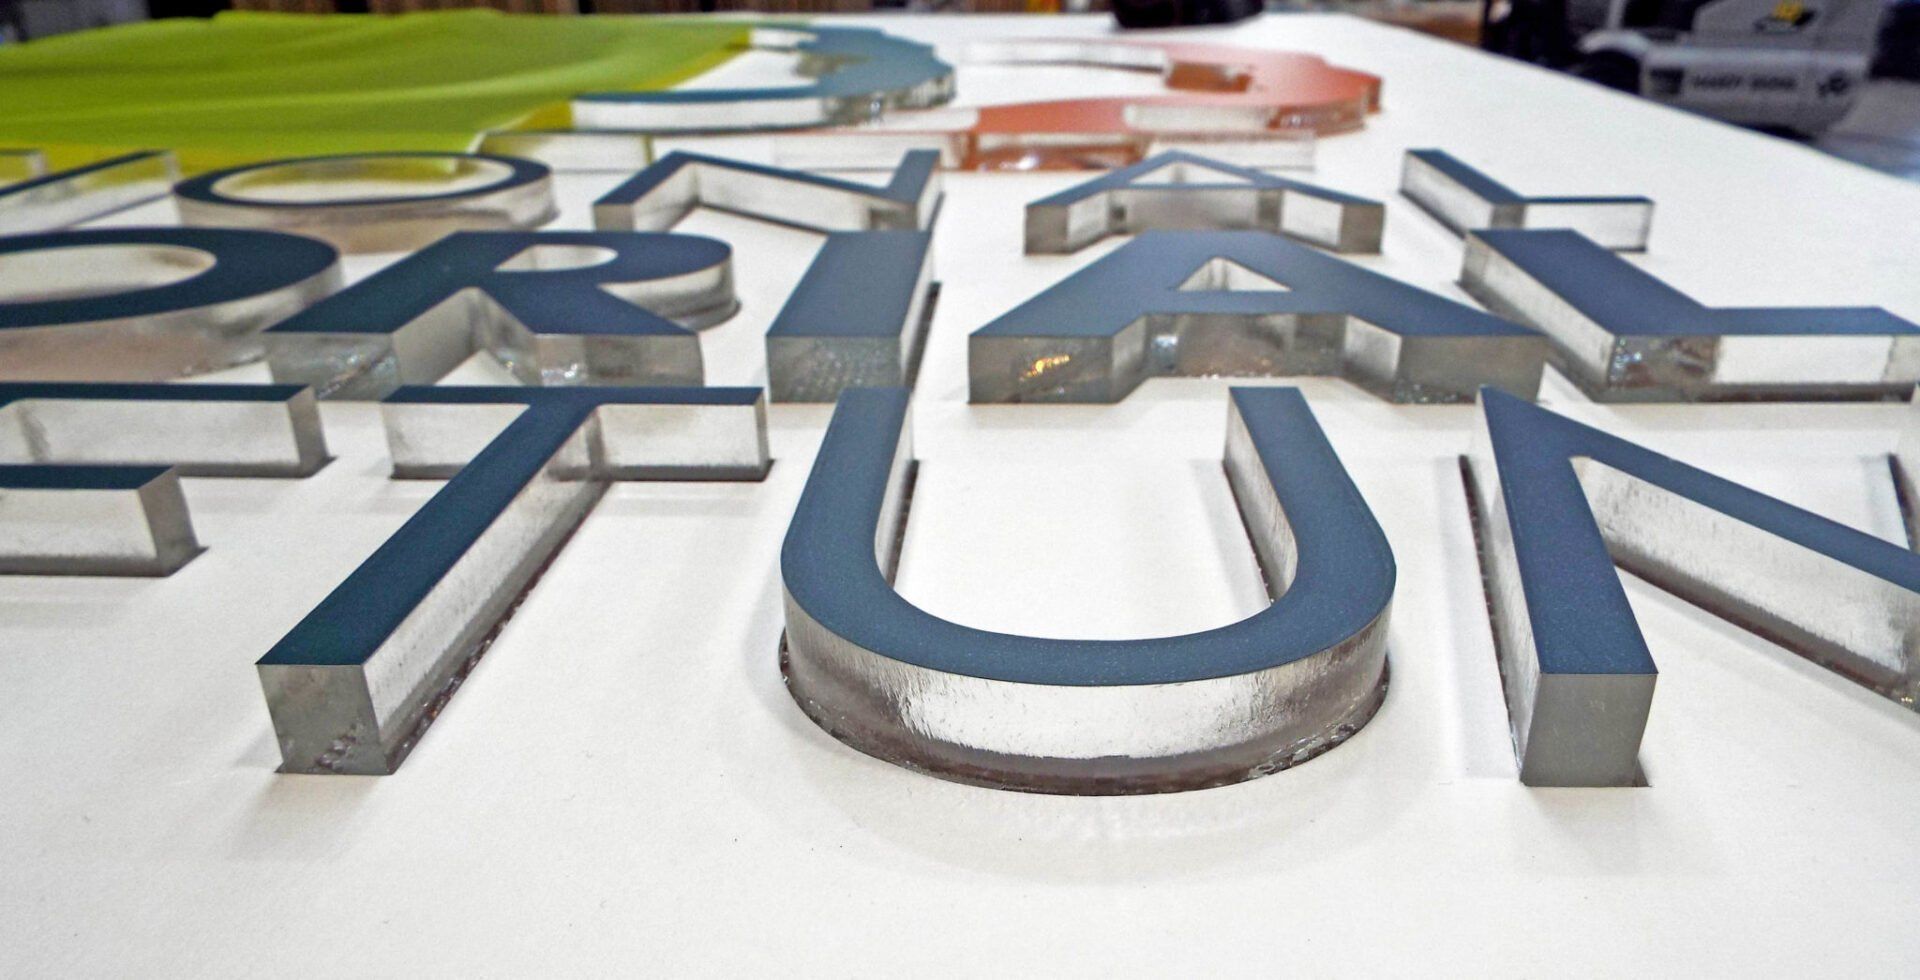 Acrylic 3D Letters & Corflute Signs